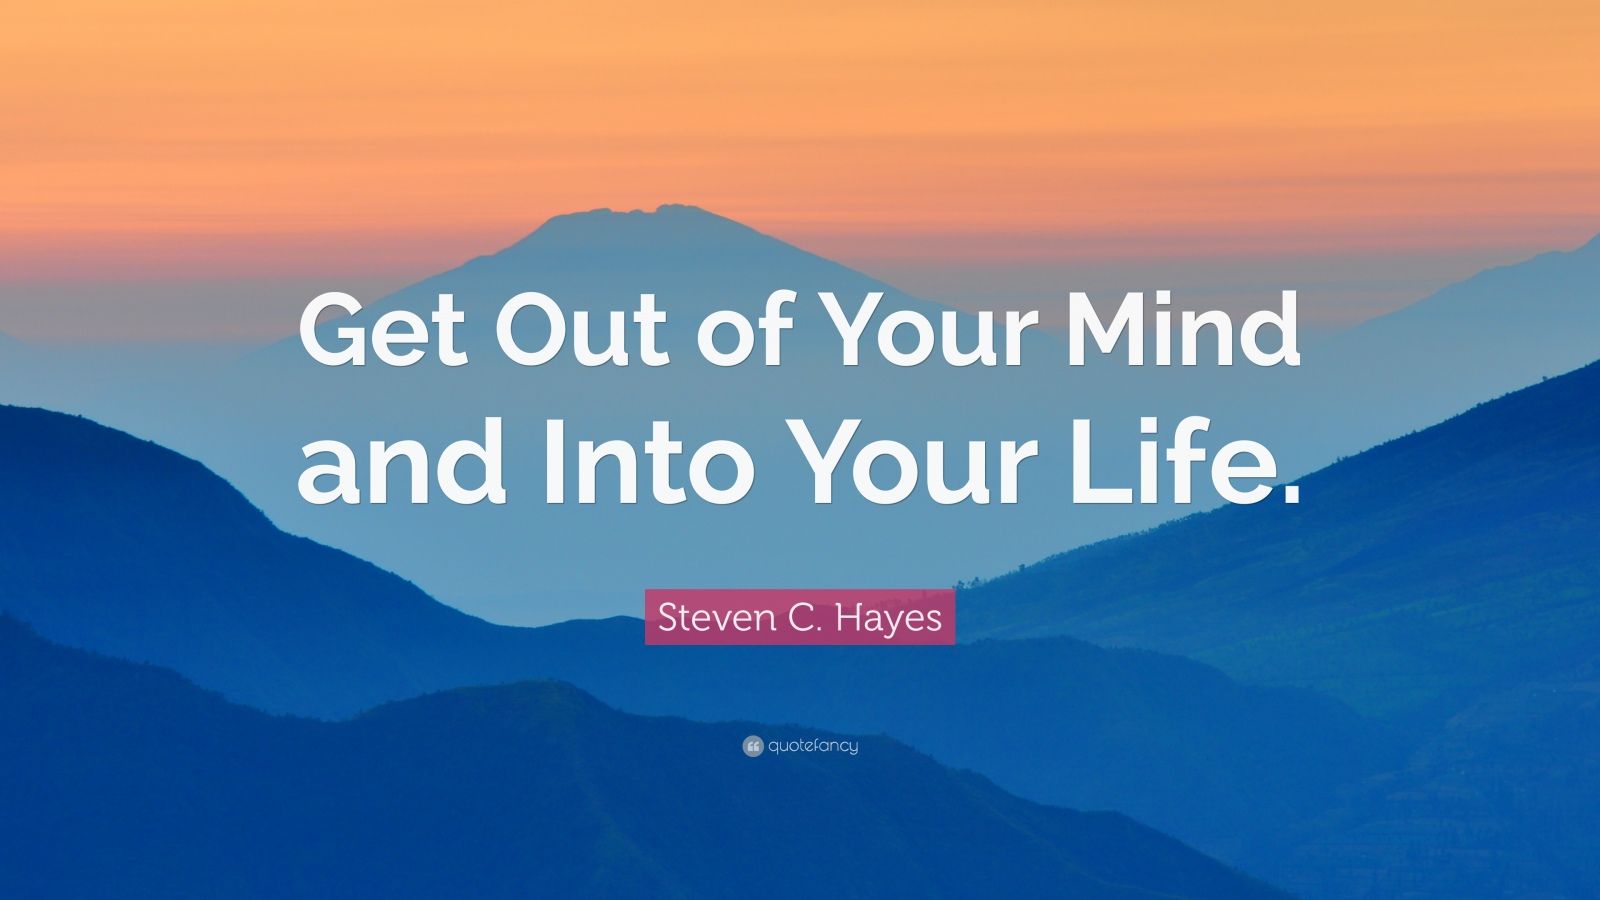 get out of your mind and into your life pdf